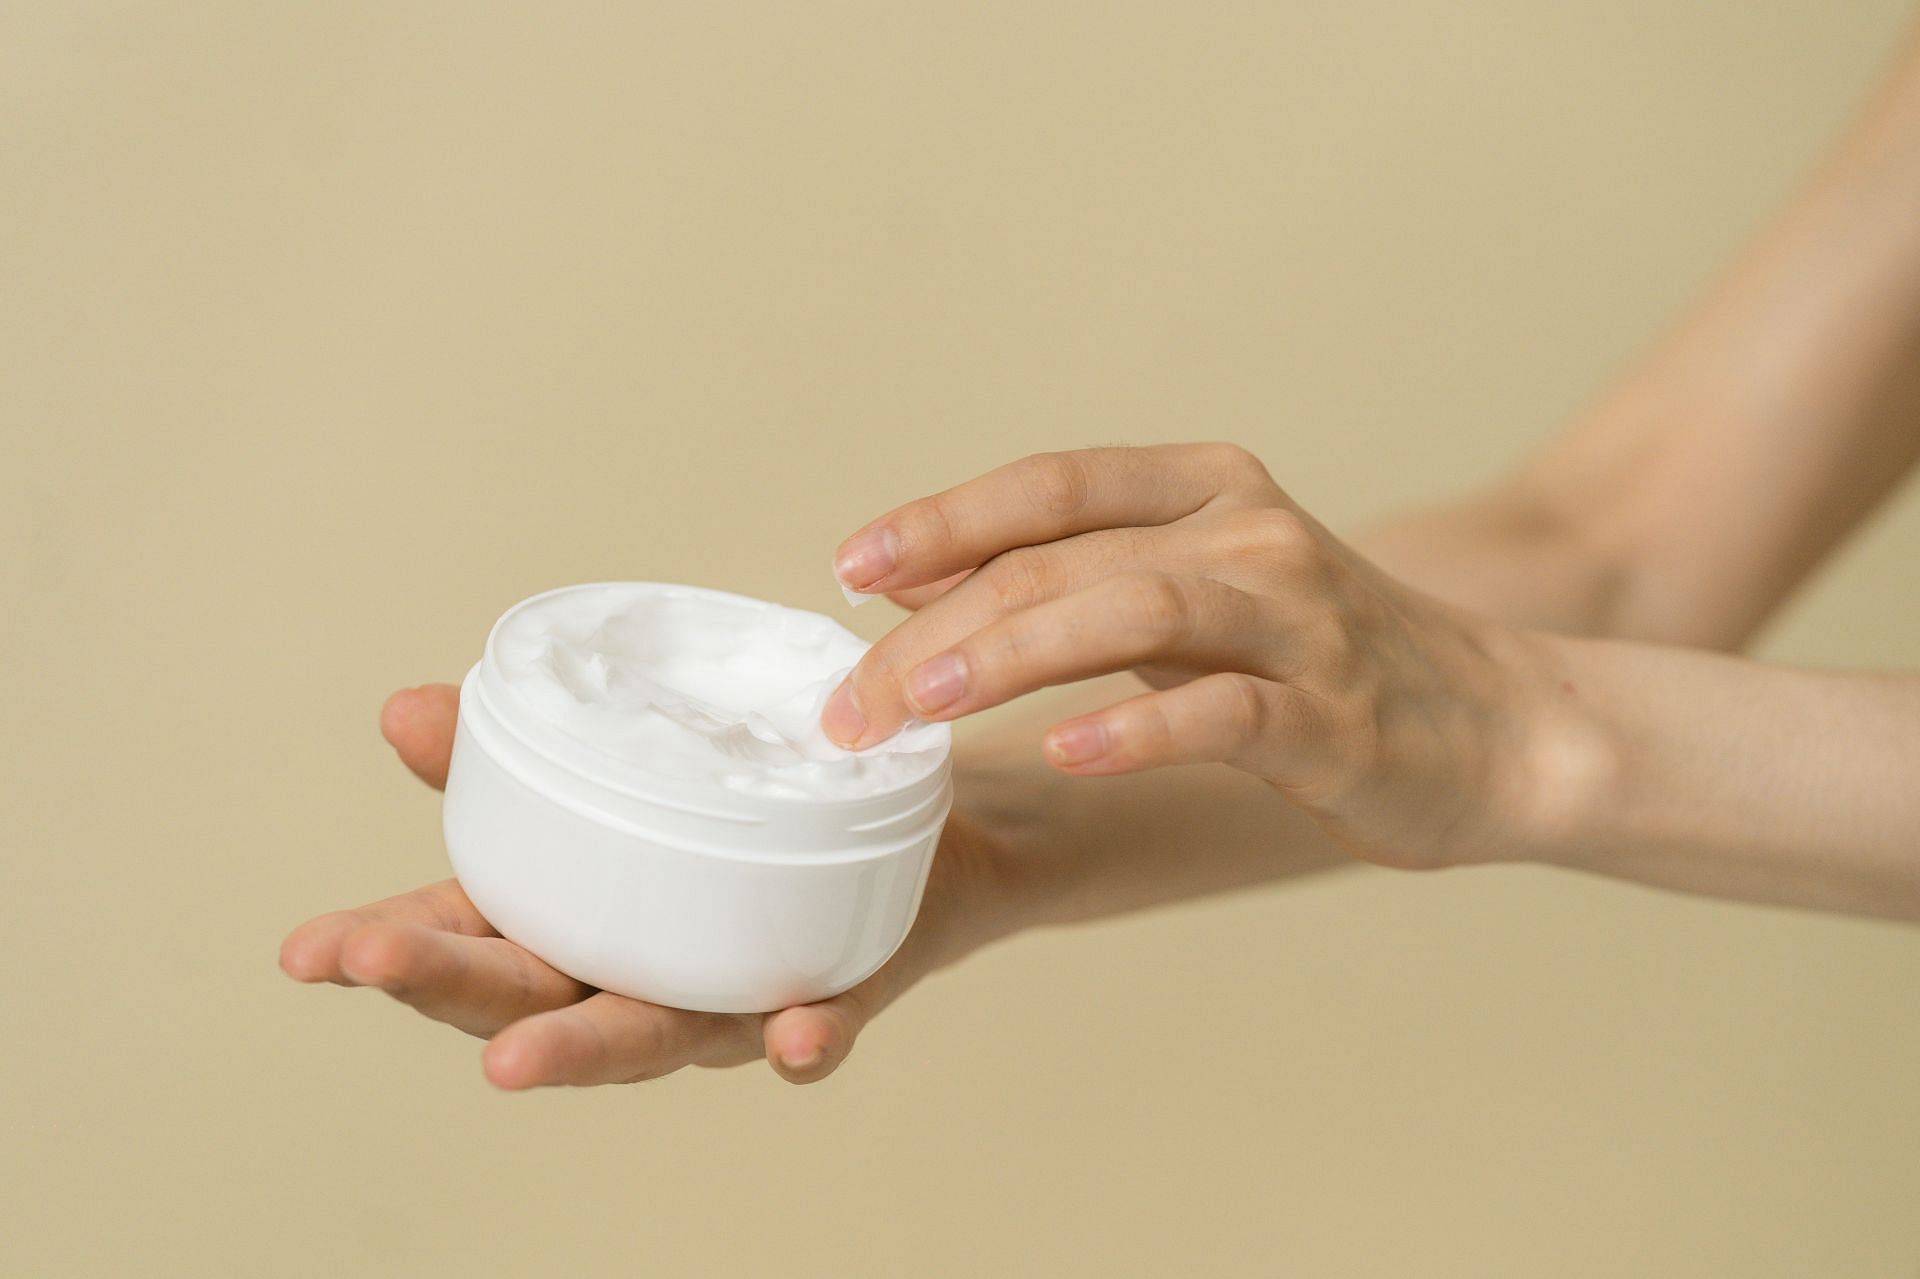 Beef tallow for skin: is it safe to use? (Image via Pexels / Shvets Production)